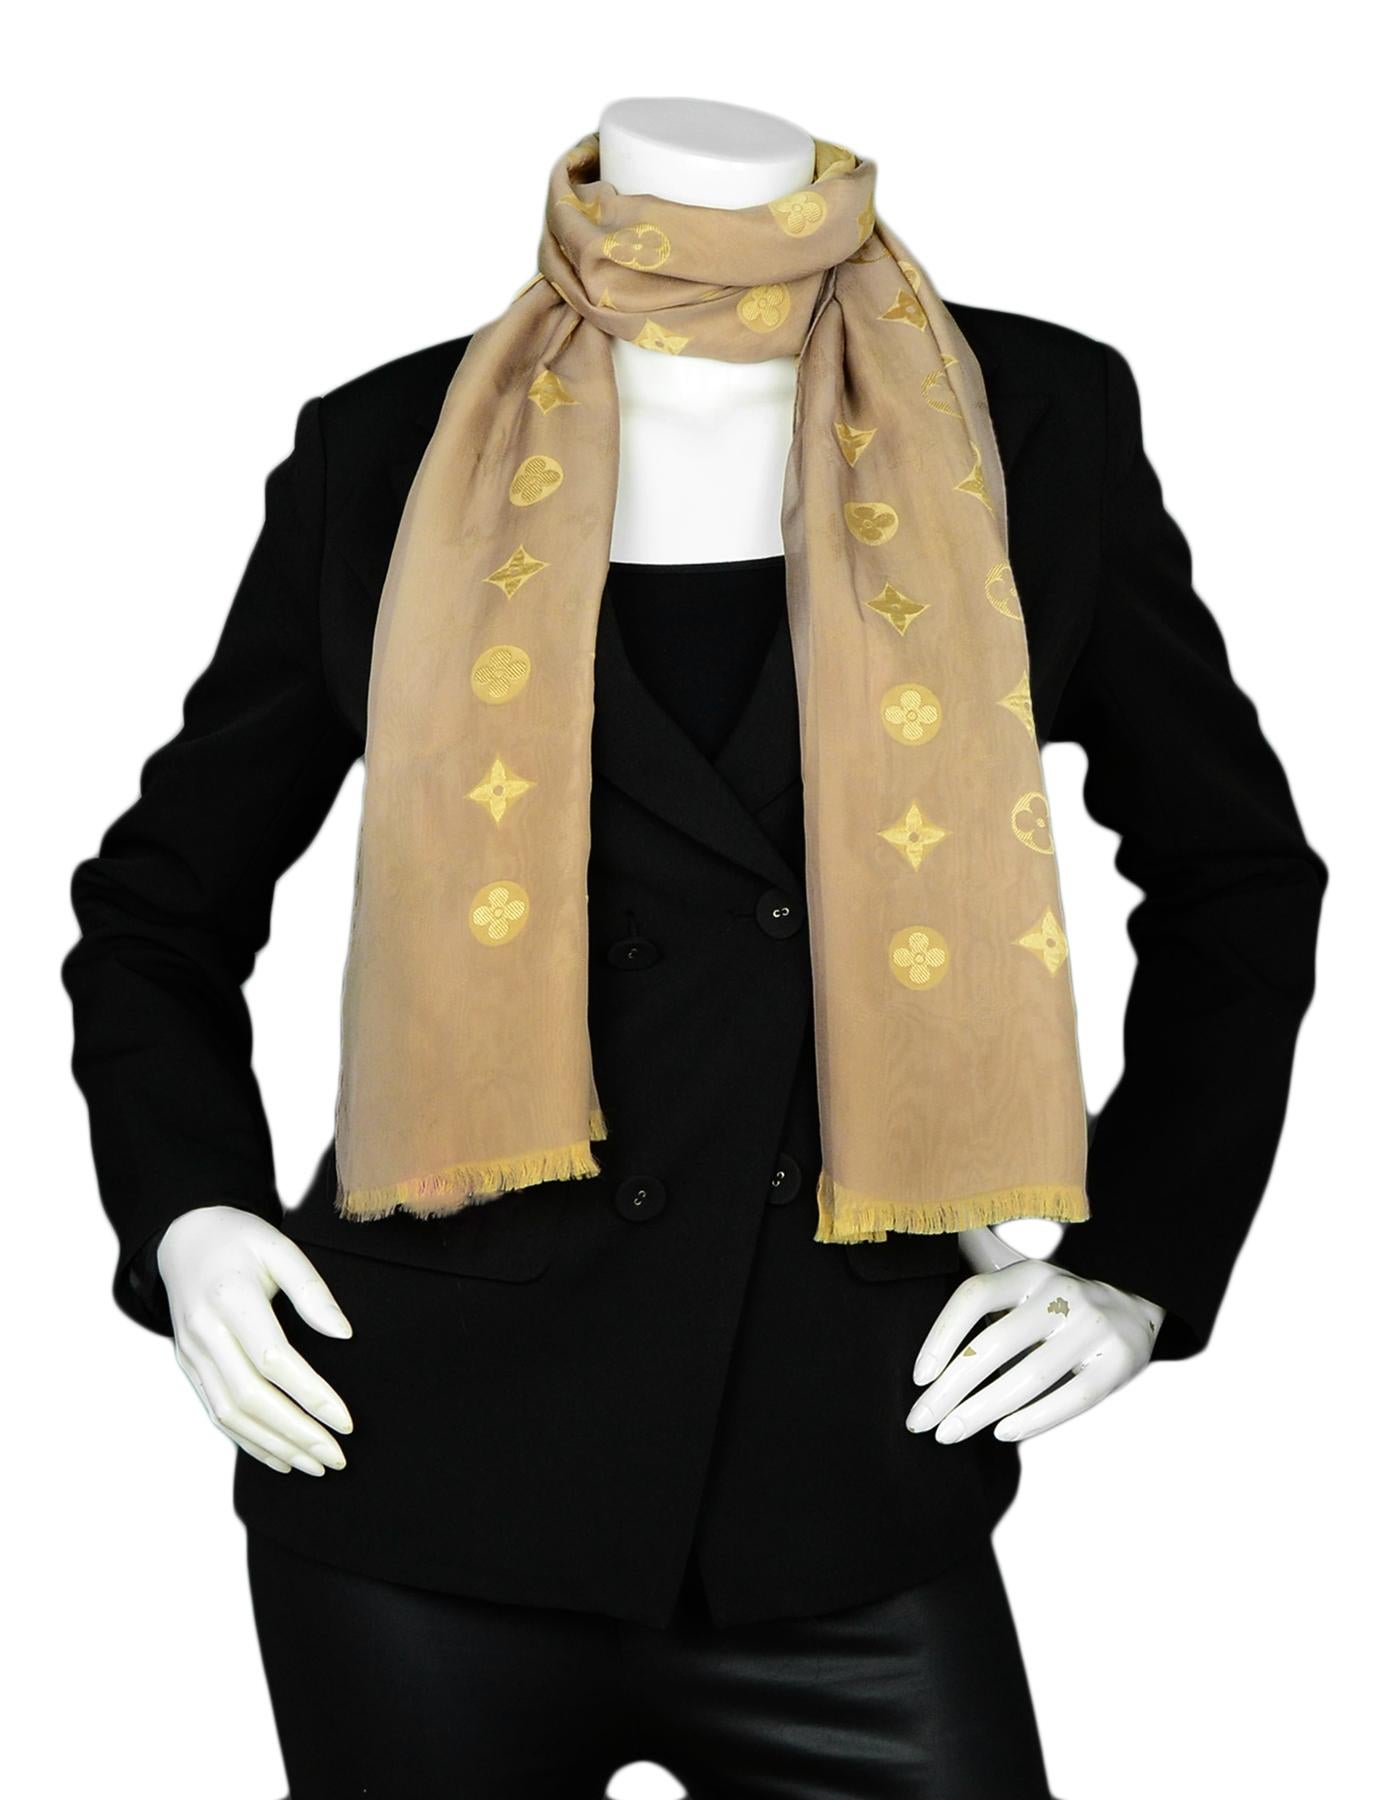 Louis Vuitton Taupe/Beige Reversible Chiffon Monogram Scarf / Stole

Made in: Italy
Color: Taupe, beige
Materials: Acetate, silk
Overall Condition: Very good pre-owned condition, with the exception of some minor stains
Estimated Retail: $450 +